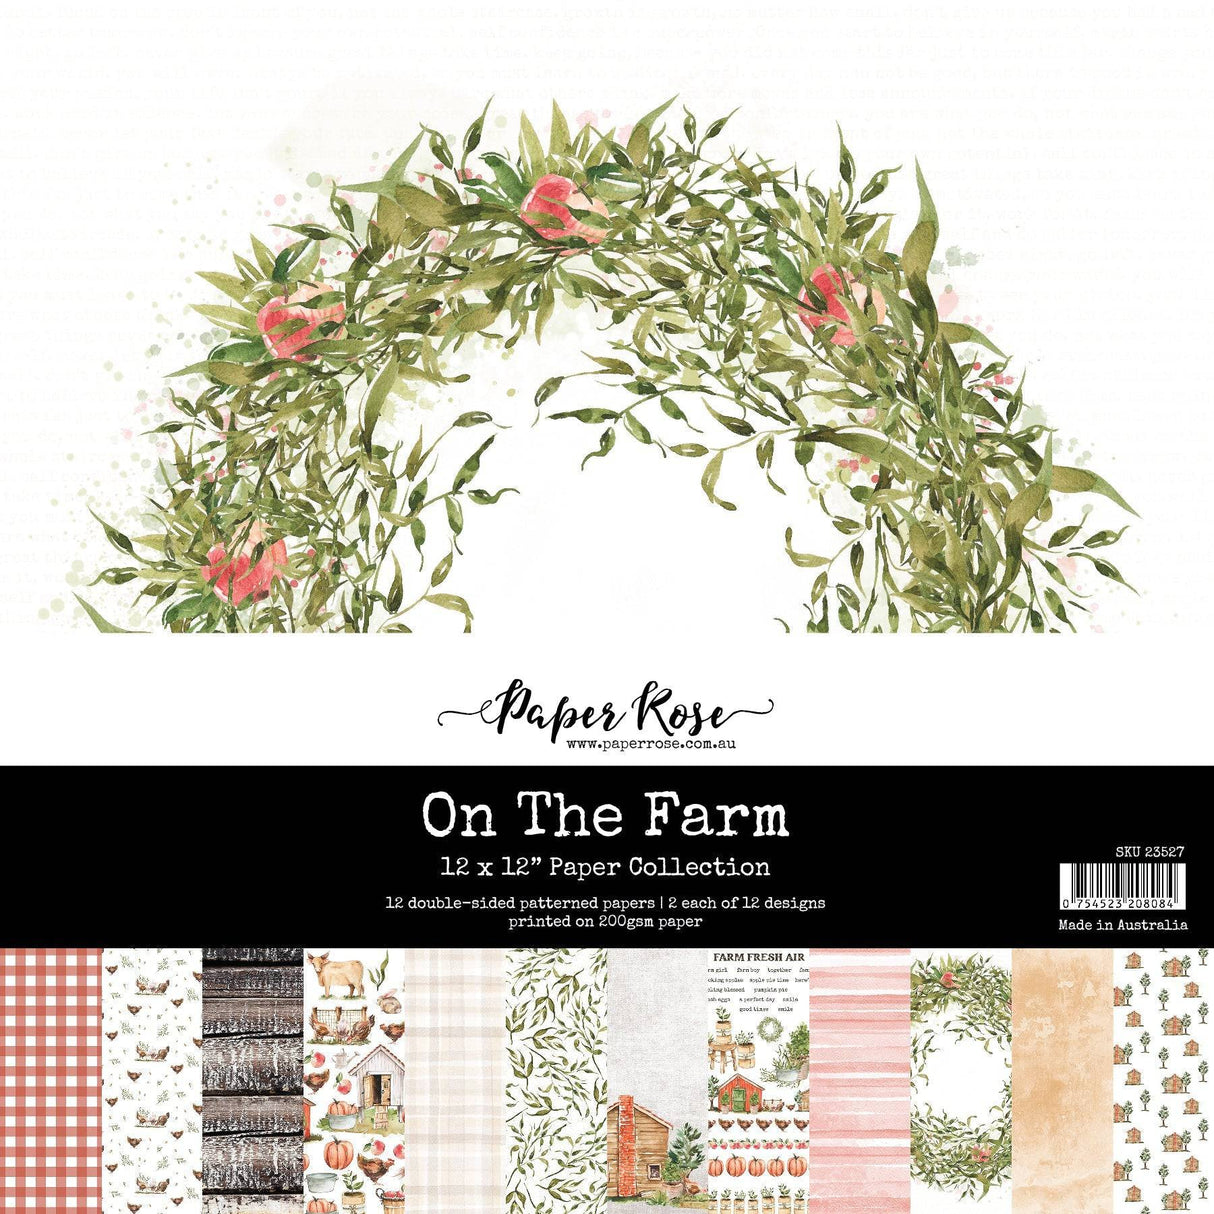 On The Farm 12x12 Paper Collection 23527 - Paper Rose Studio